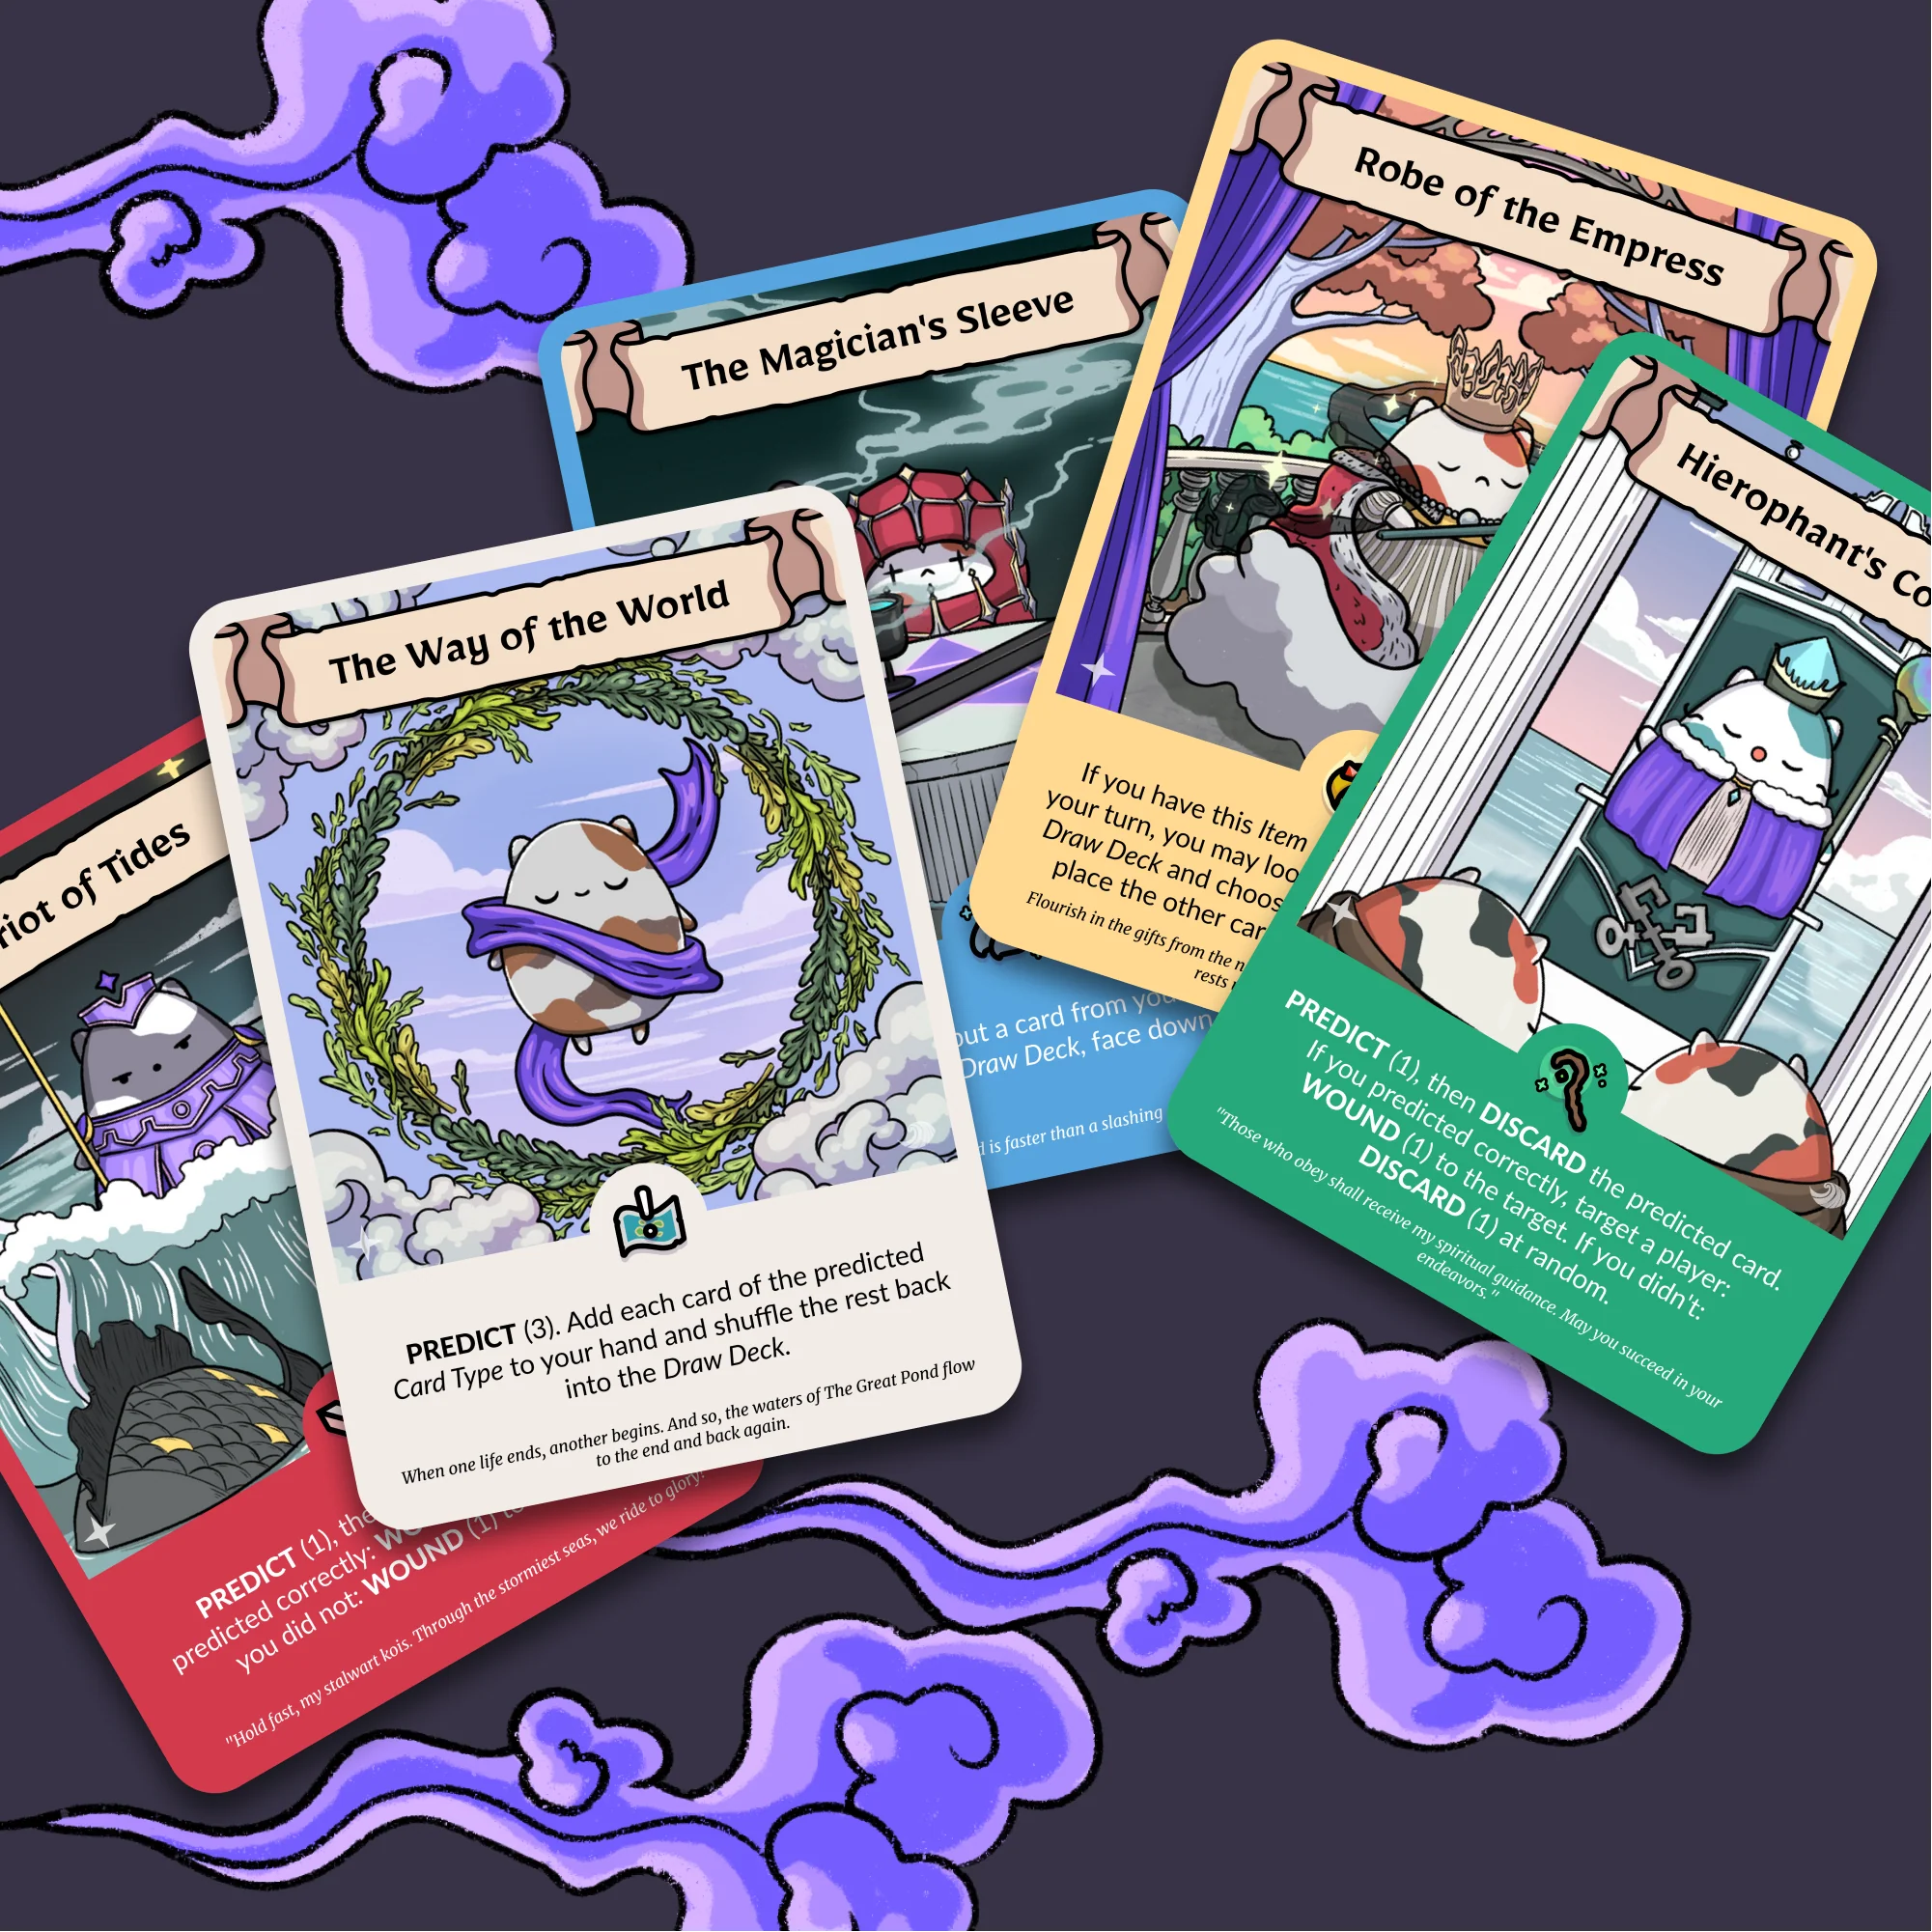 Card of Fortune, our first expansion pack!